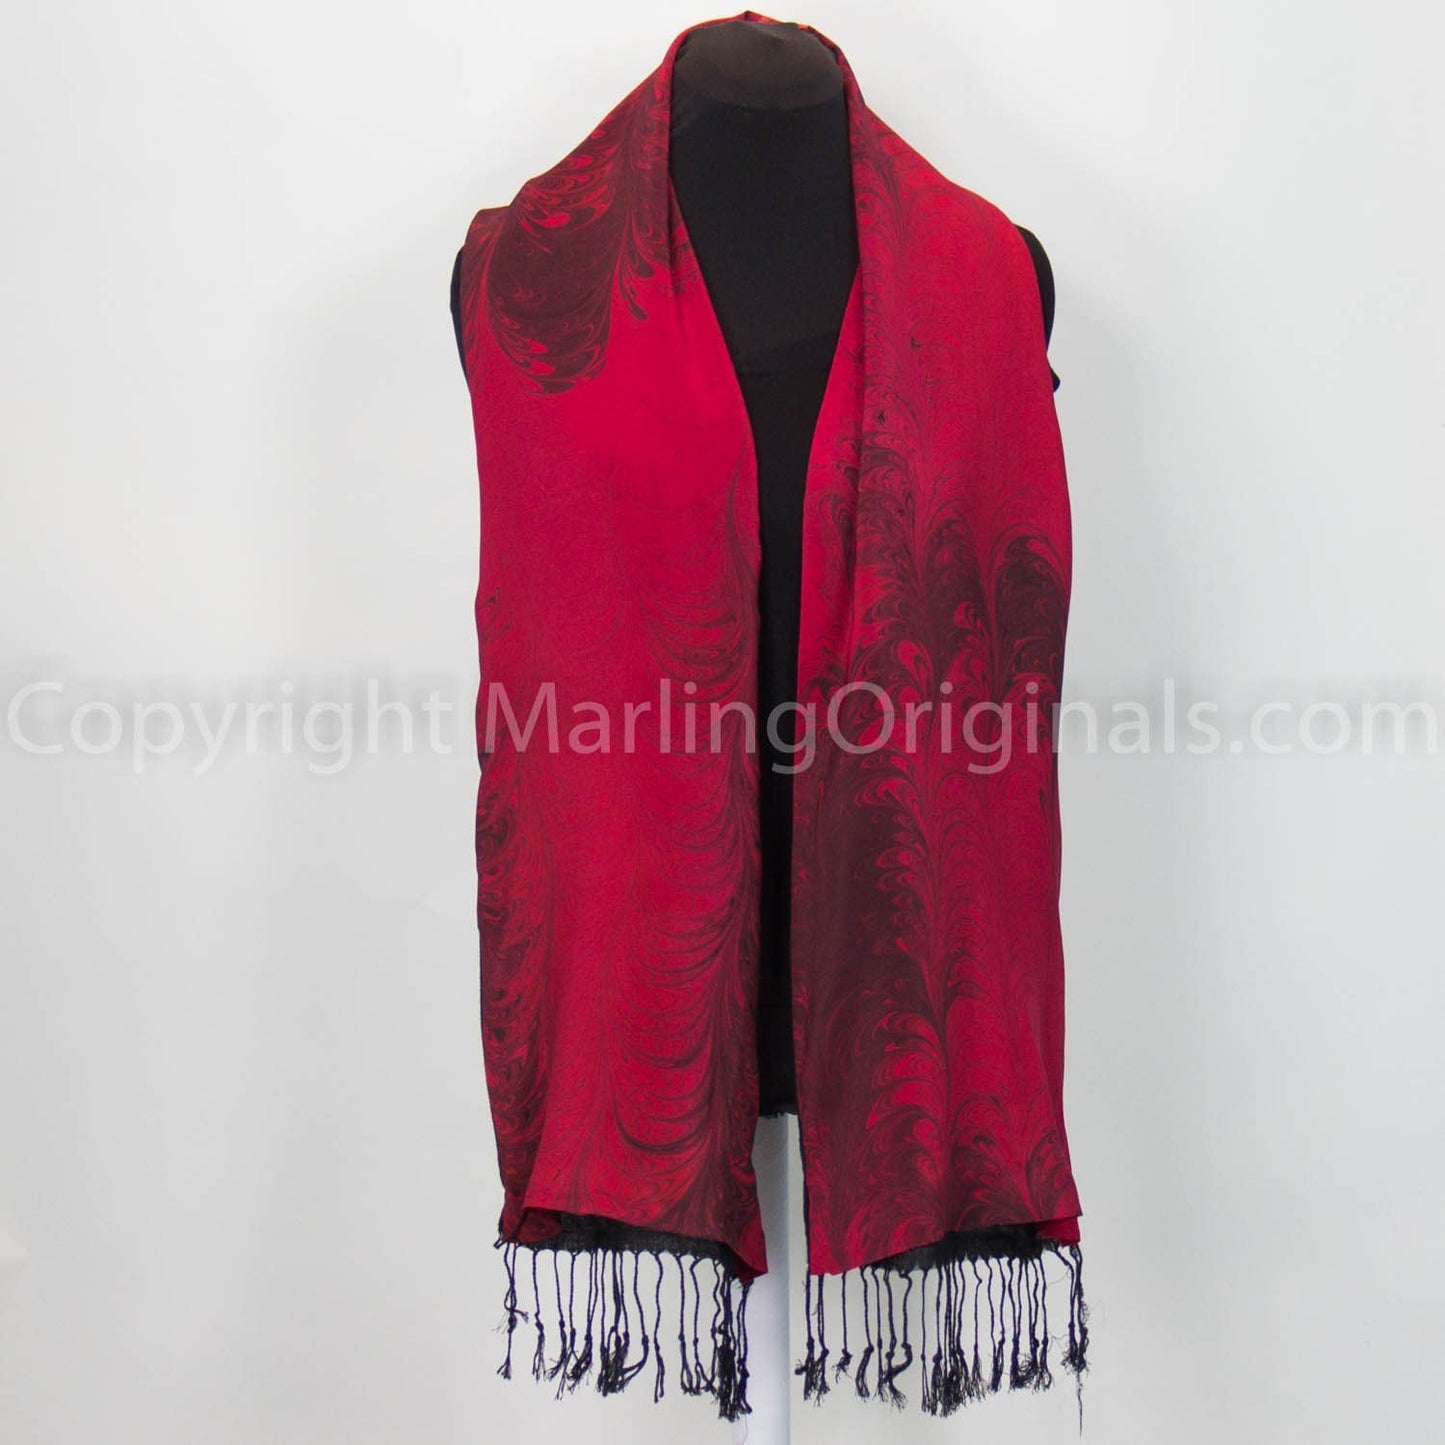 marbled silk coat scarf in red and black feathered pattern.  Lined with black fringed acrylic.